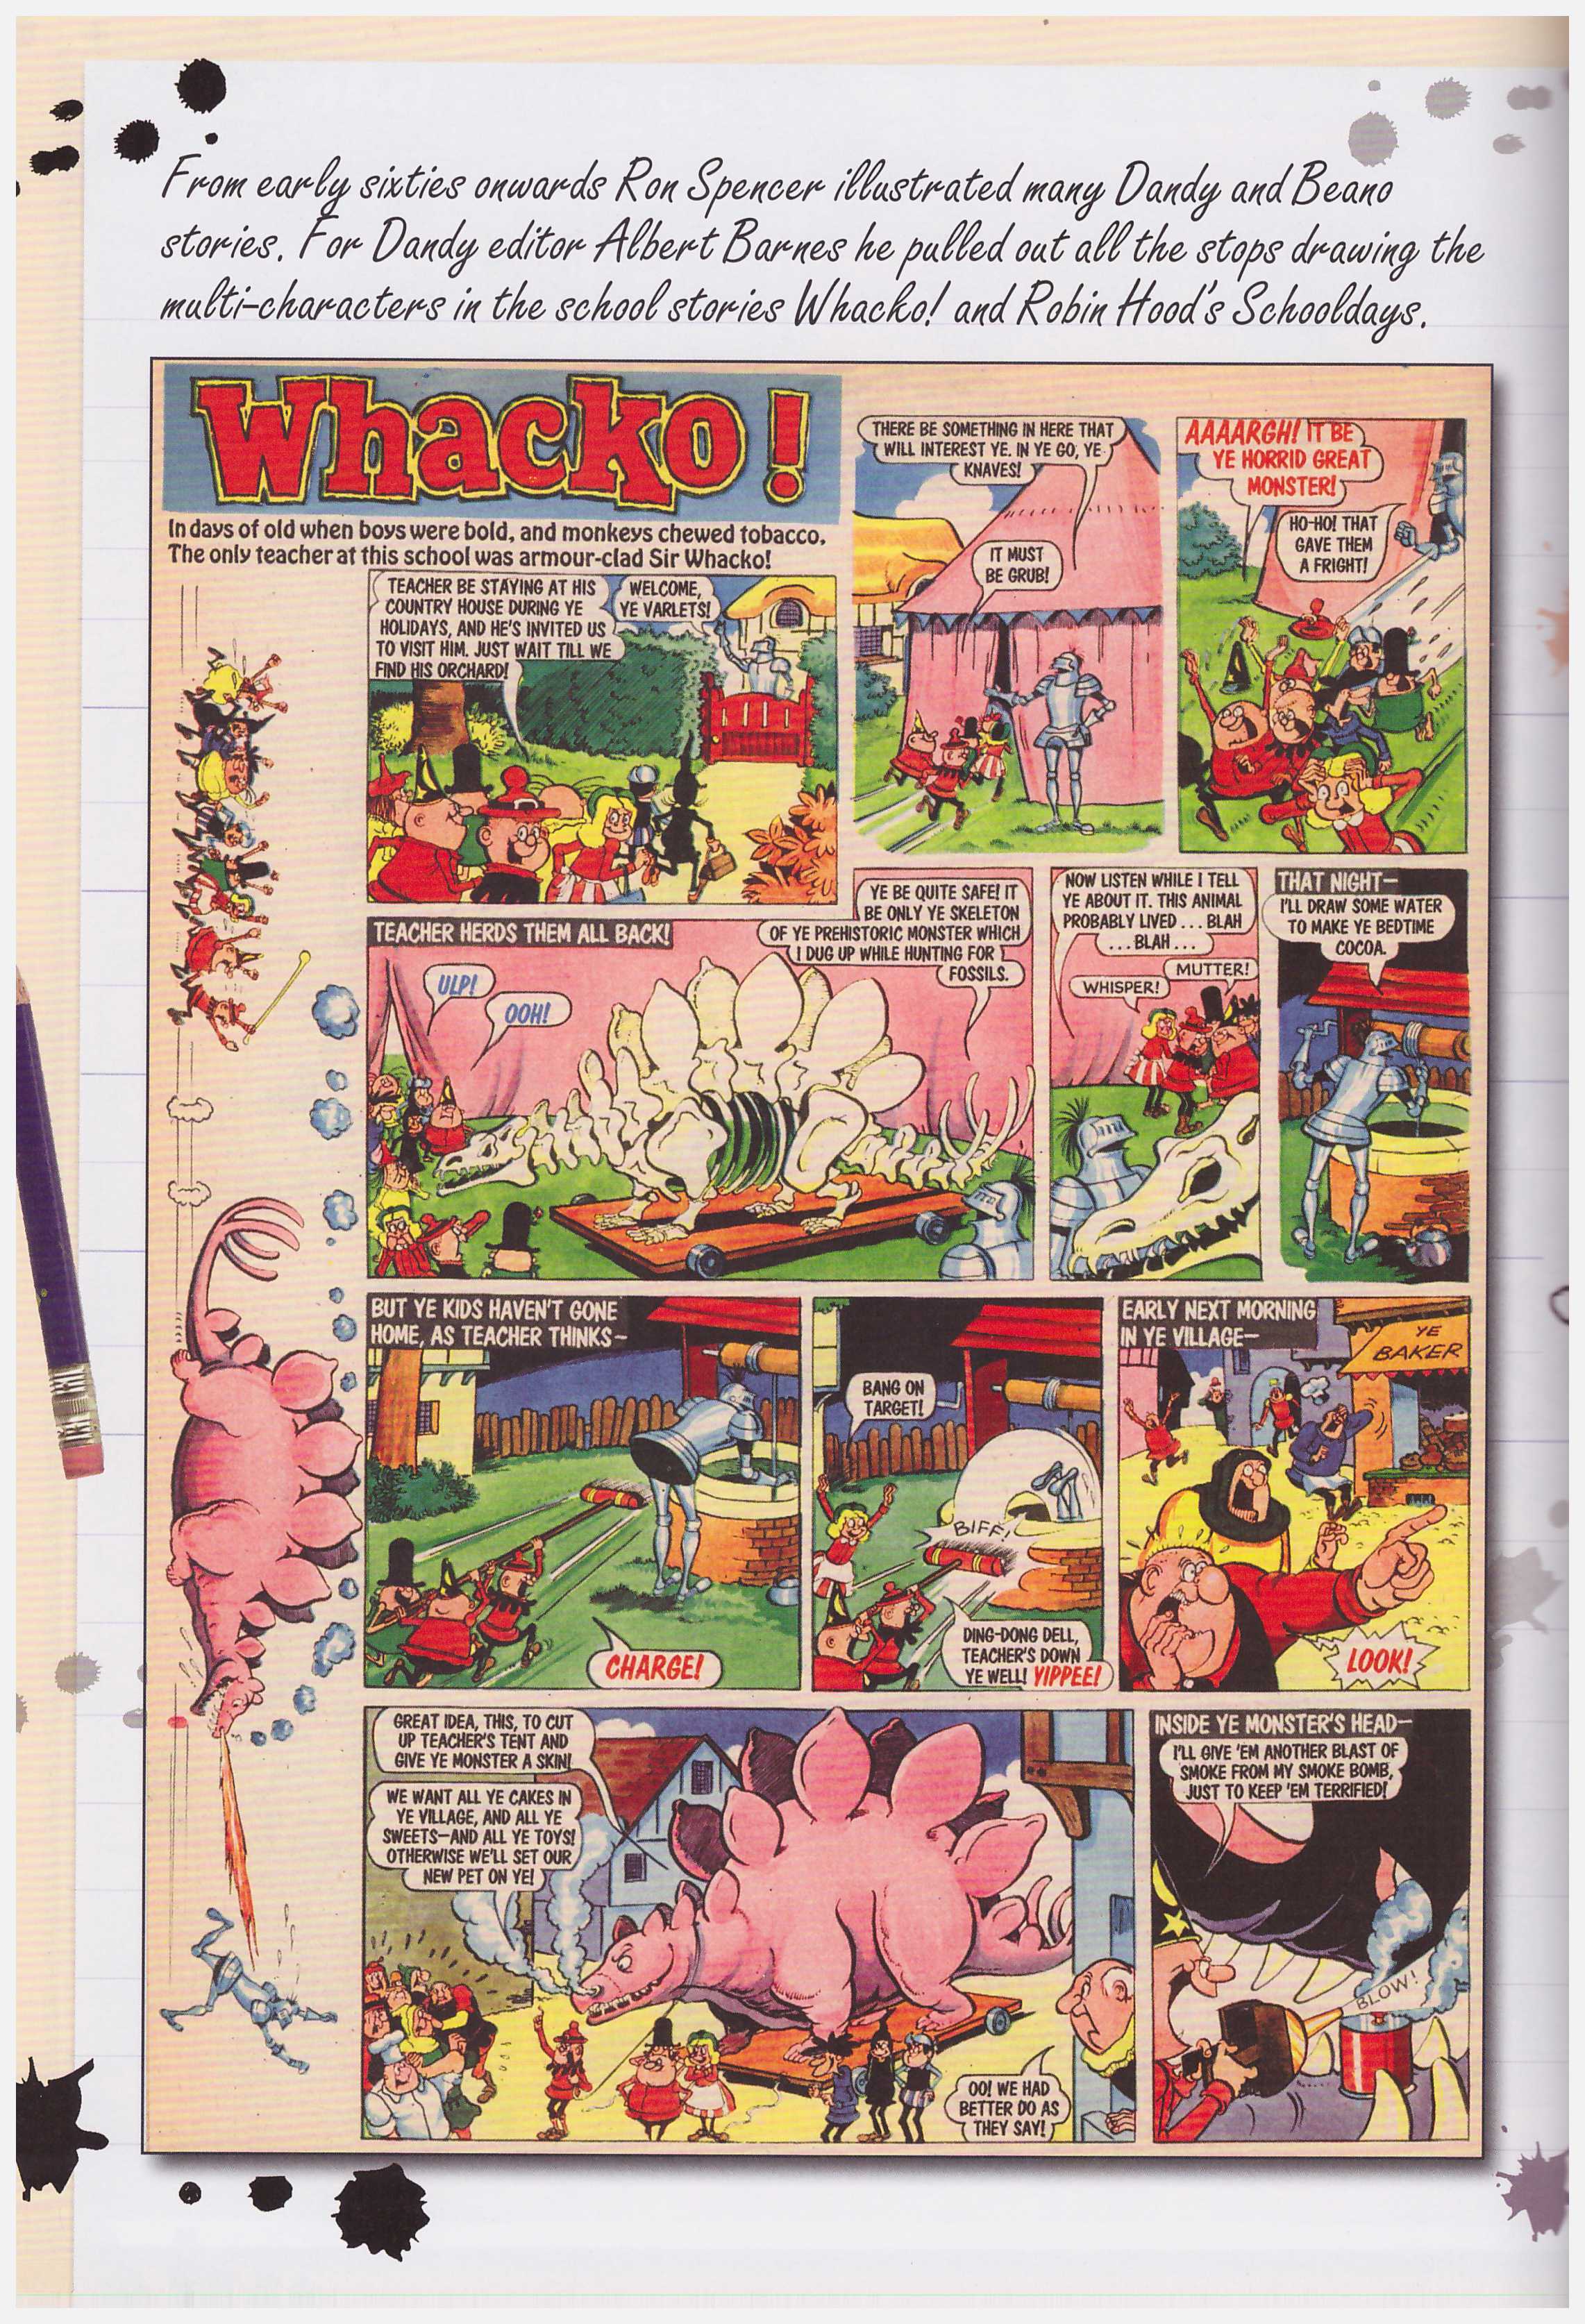 The Beano and the Dandy Comics in the Classroom